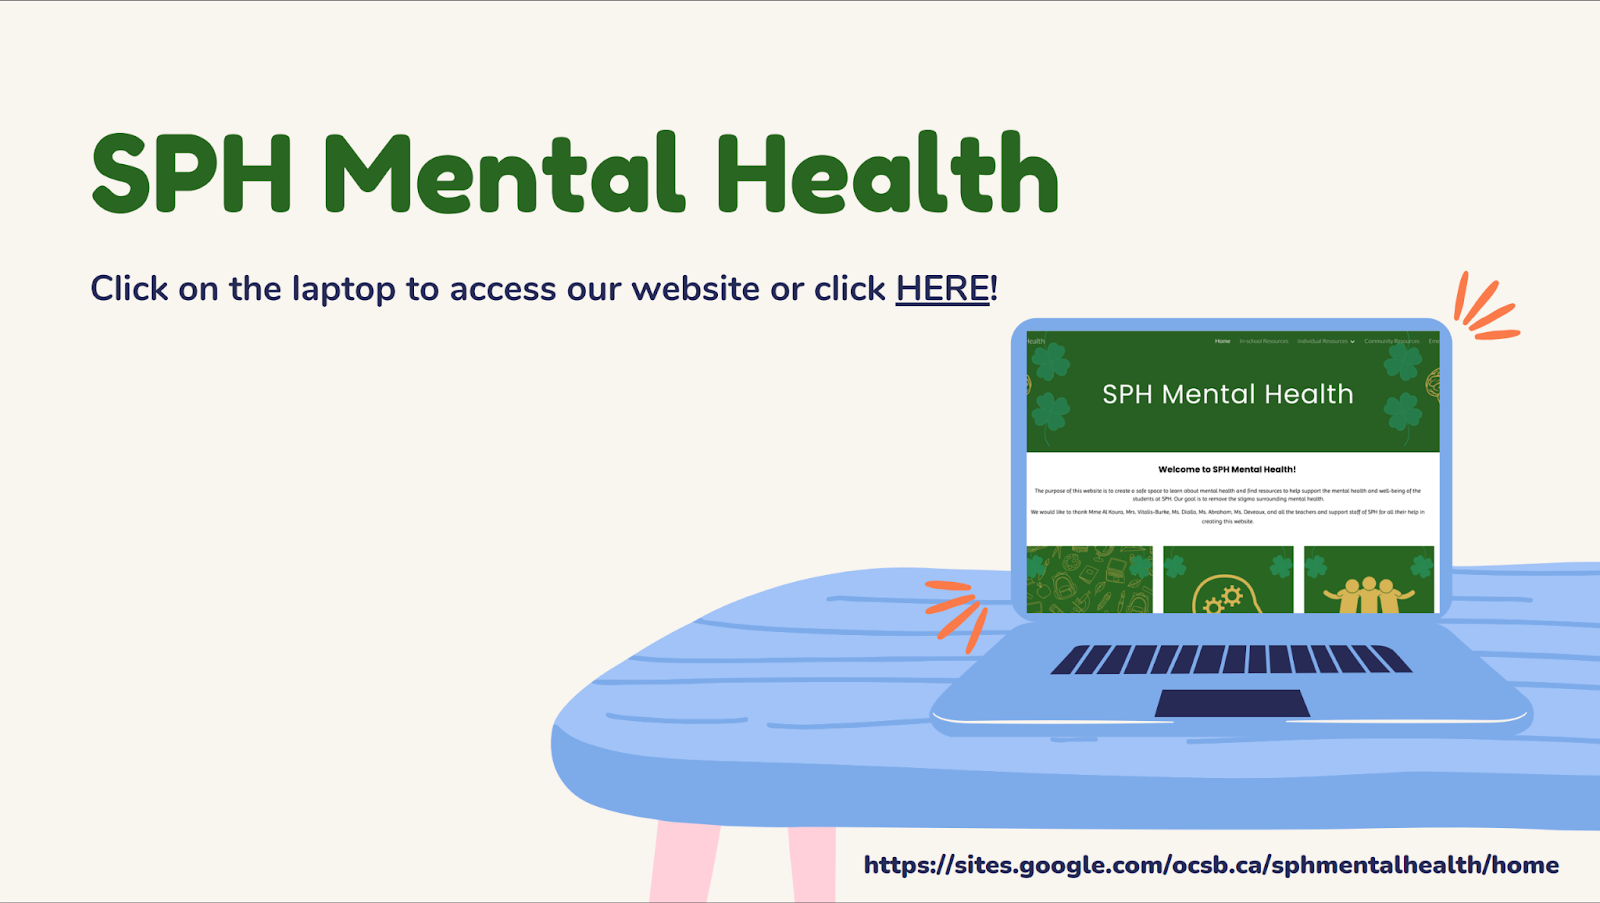 An illustration of a laptop on a desk. The laptop screen shows the students' mental health website. 